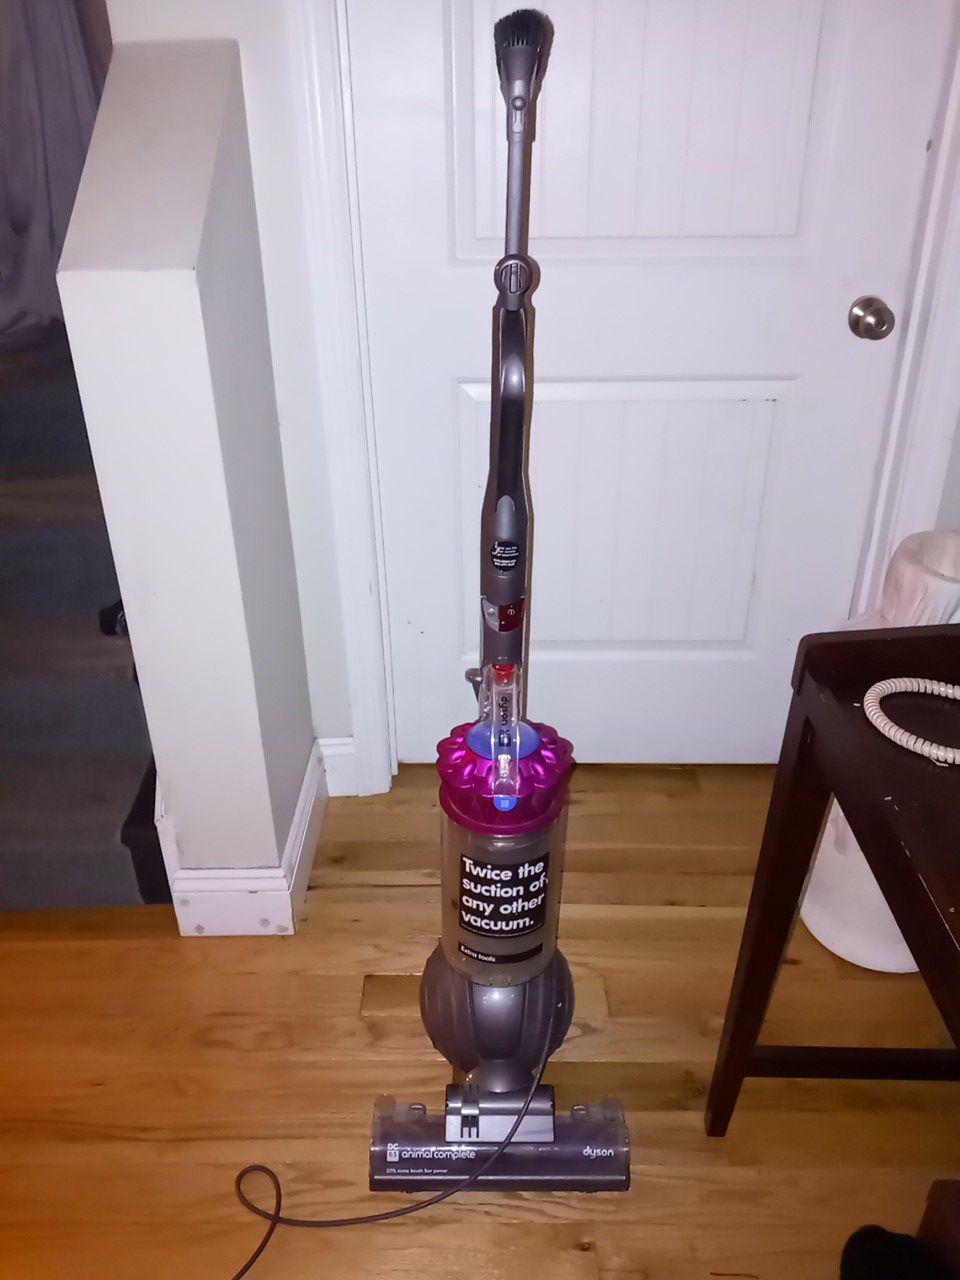 Dyson animal dc65 Works fine some scratches and normal wear and tear but excellent vacuum